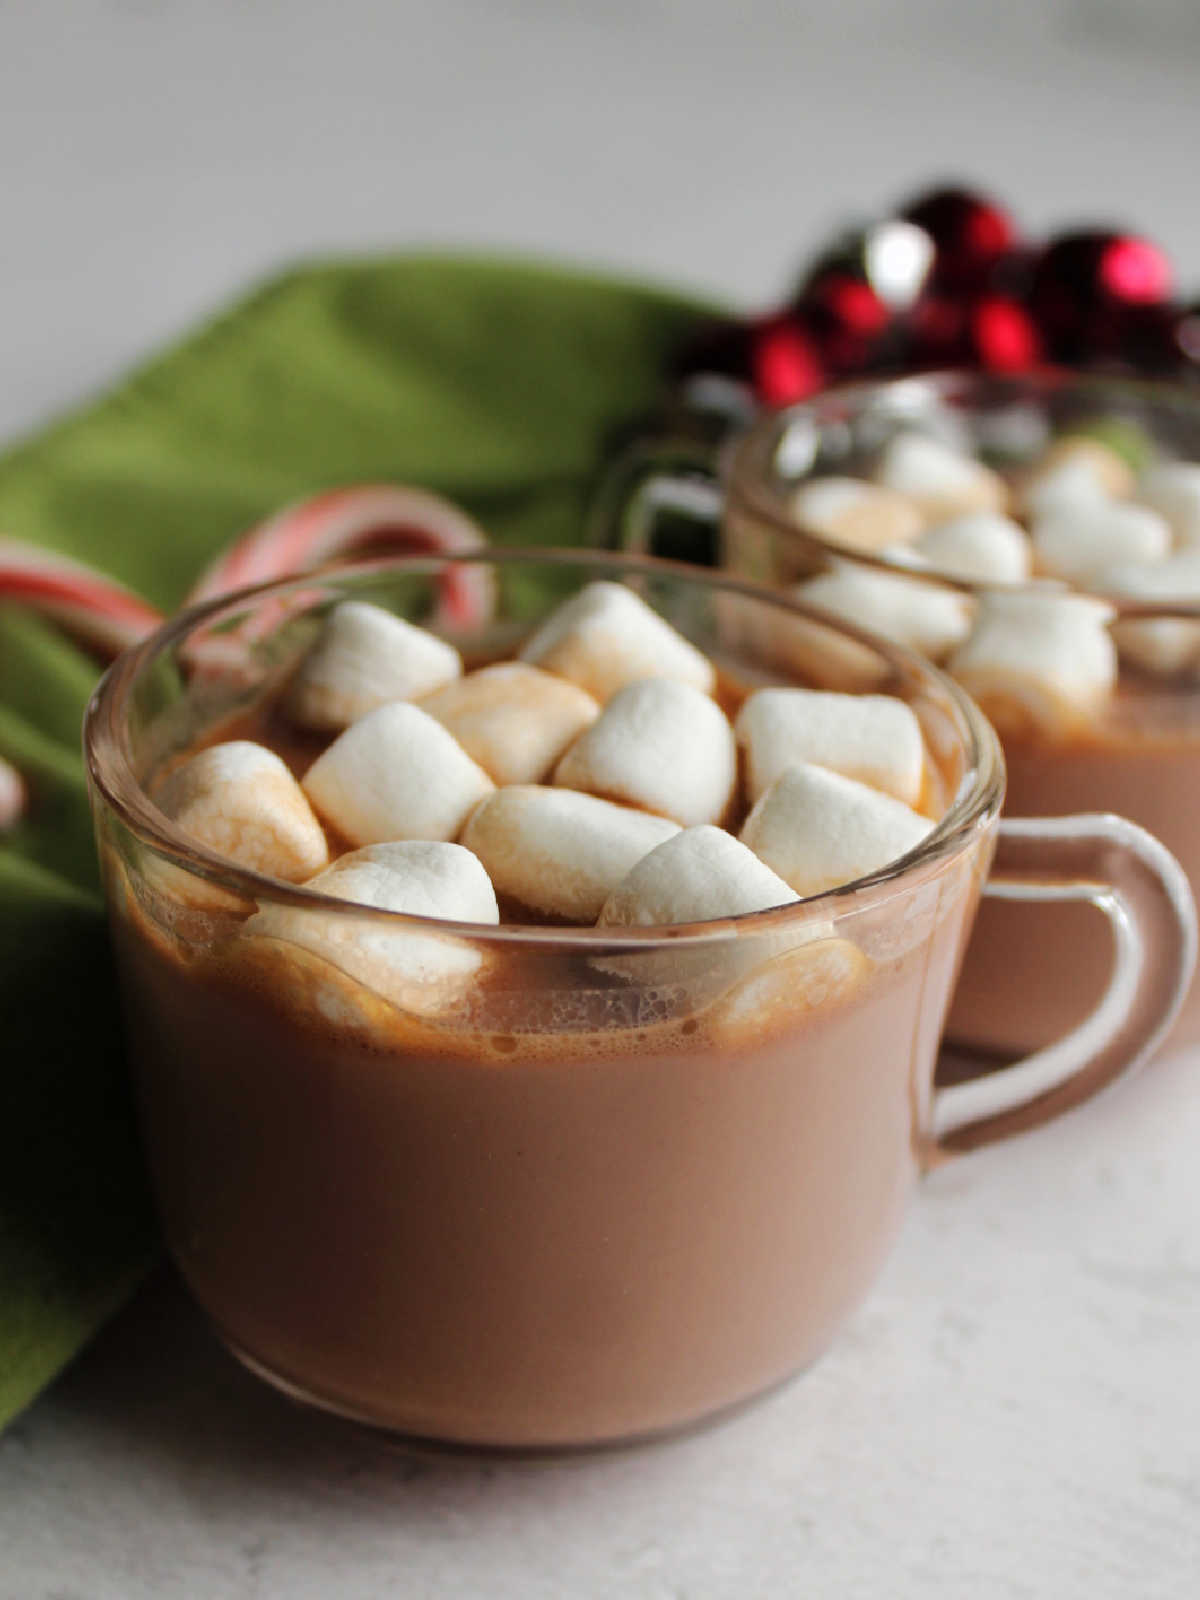 Small glass mugs with slow cooker hot chocolate topped with mini marshmallows and candy canes.